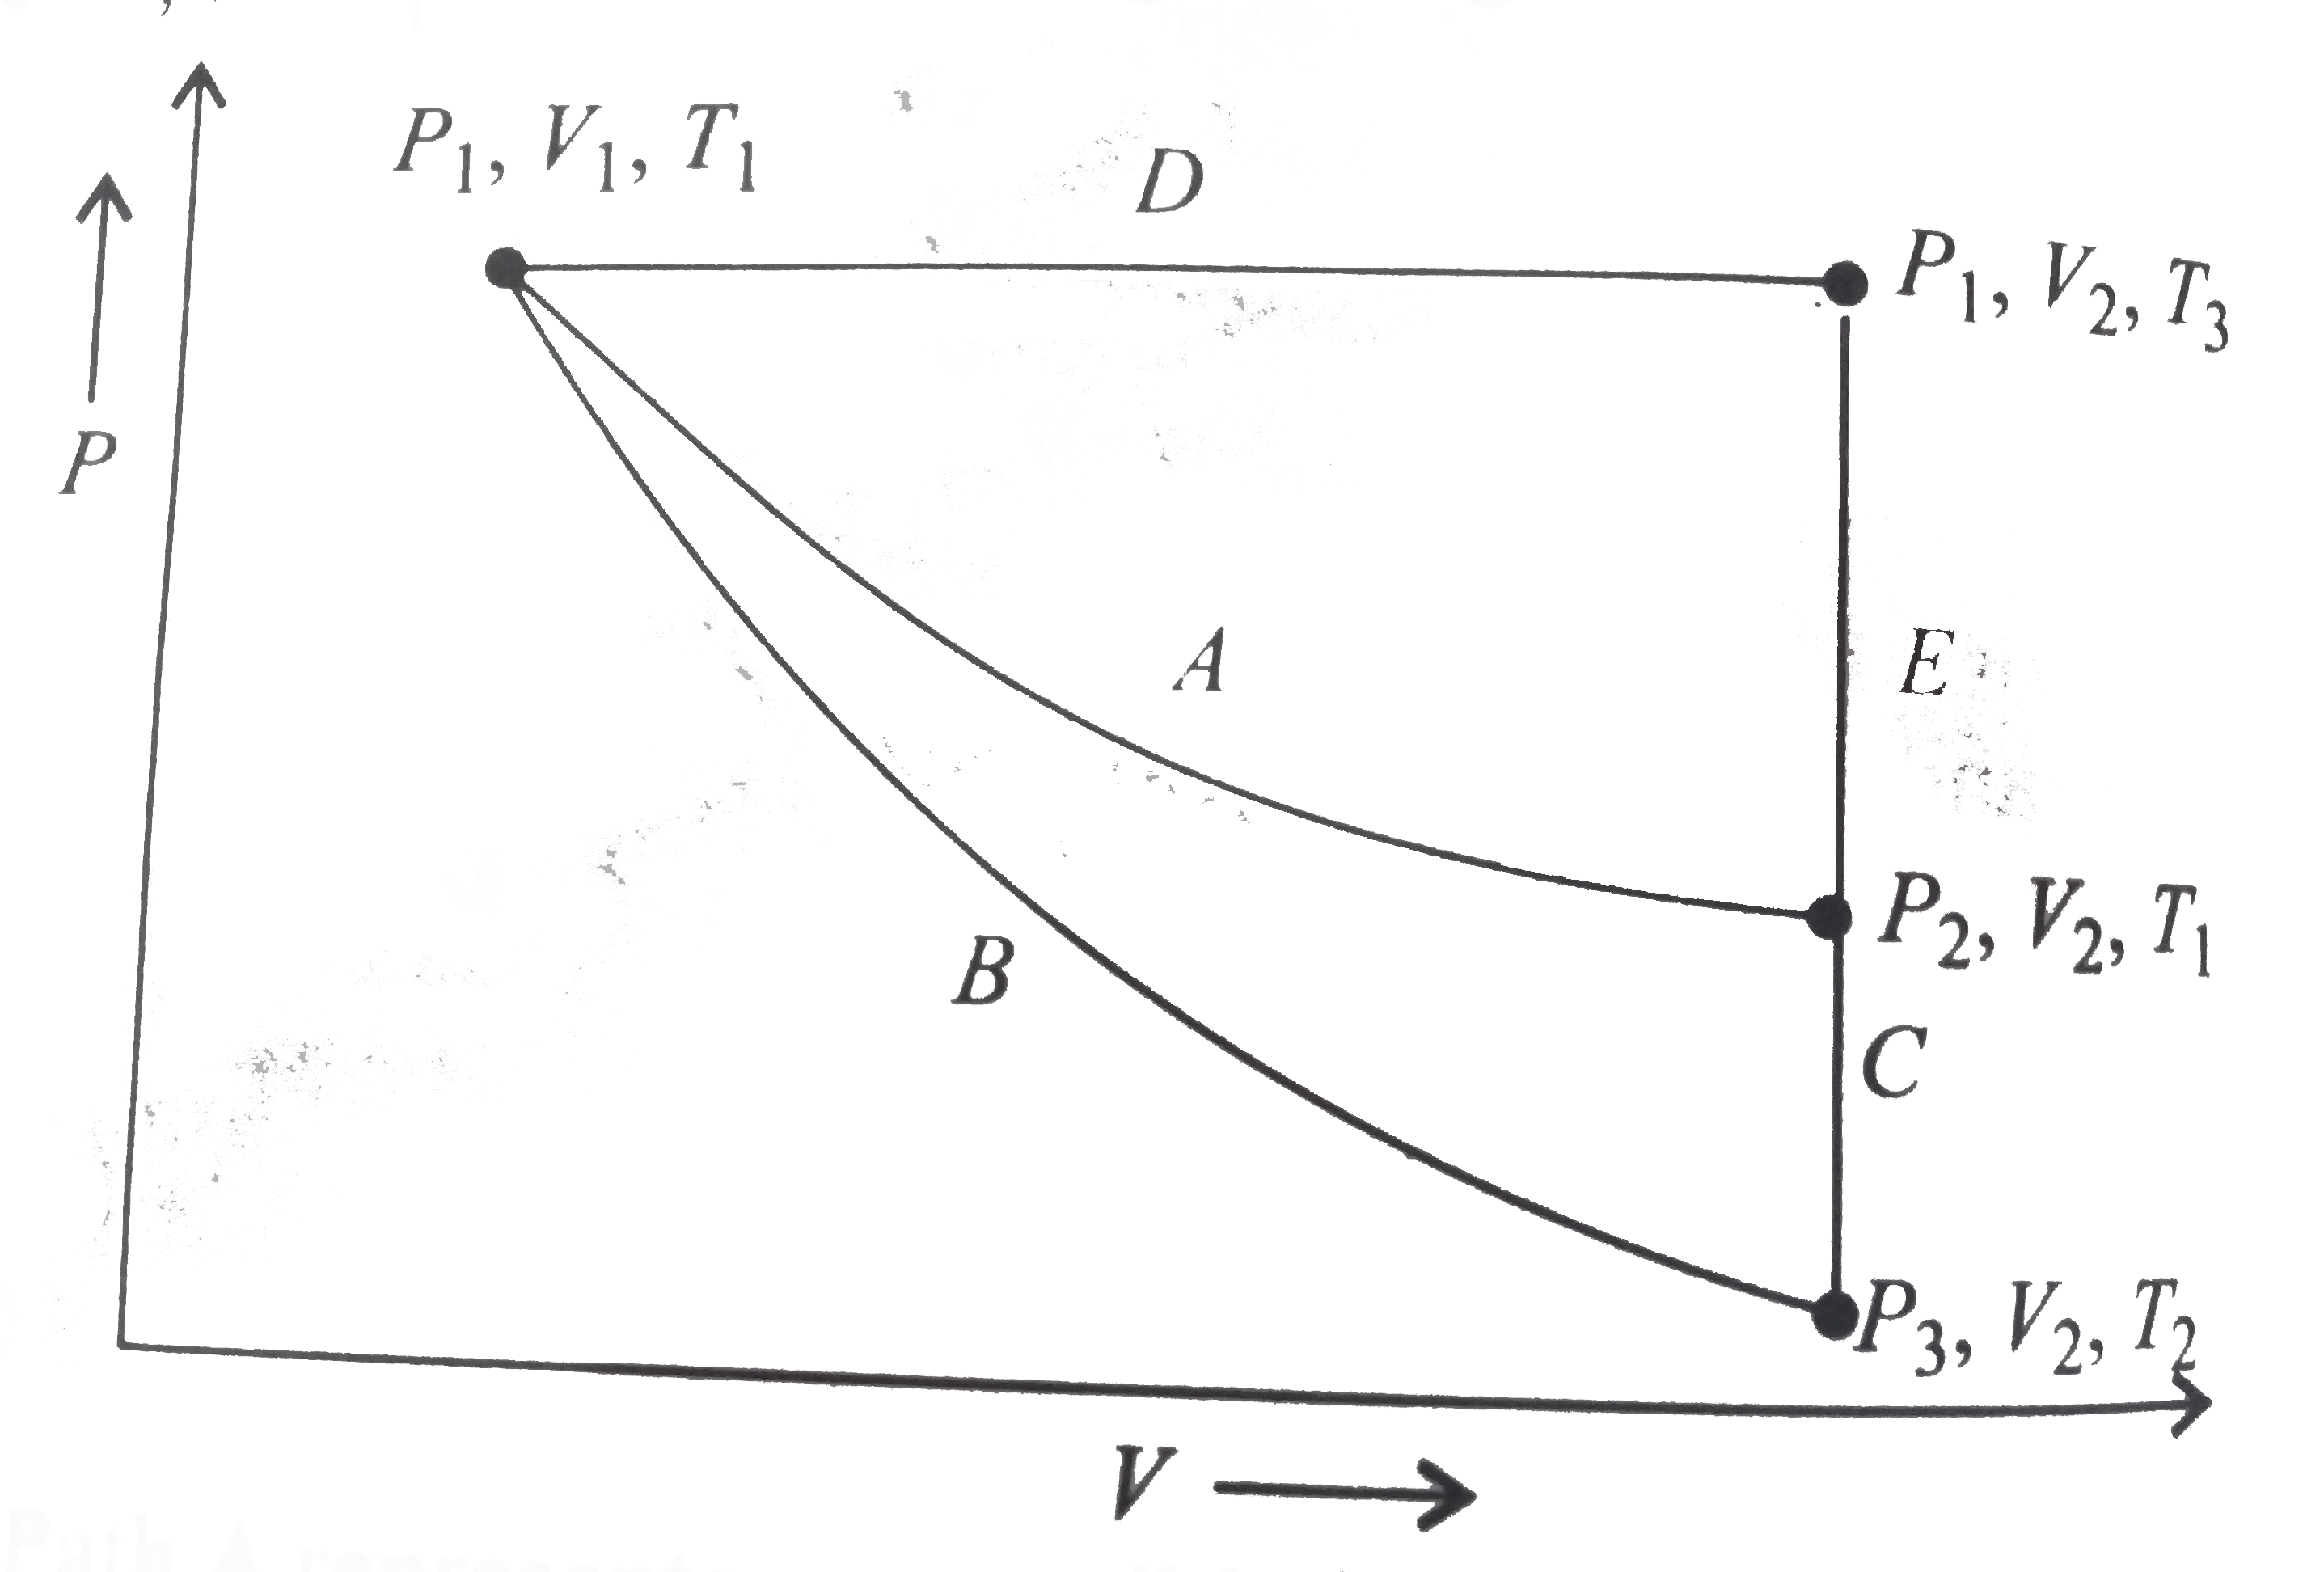 For an ideal gas, an illustration of three different paths A,(B+C) and (D+E) from an initial state P(1), V(1), T(1) to a final state P(2), V(2),T(1) is shown in the given figure.      Path Arepresents a reversible isothermal expansion form P(1),V(1) to P(2),V(2), Path (B+C) represents a reversible adiabatic expansion (B) from P(1),V(1),T(1)to P(3),V(2),T(2) followed by reversible heating the gas at constant volume (C)from P(3),V(2),T(2) to P(2),V(2),T(1). Path (D+E) represents a reversible expansion at constant pressure P(1)(D) from P(1),V(1),T(1) to P(1),V(2),T(3) followed  by a reversible cooling at constant volume V(2)(E) from P(1),V(2),T(3) to P(2),V(2),T(1).   What is q(rev), for path A?